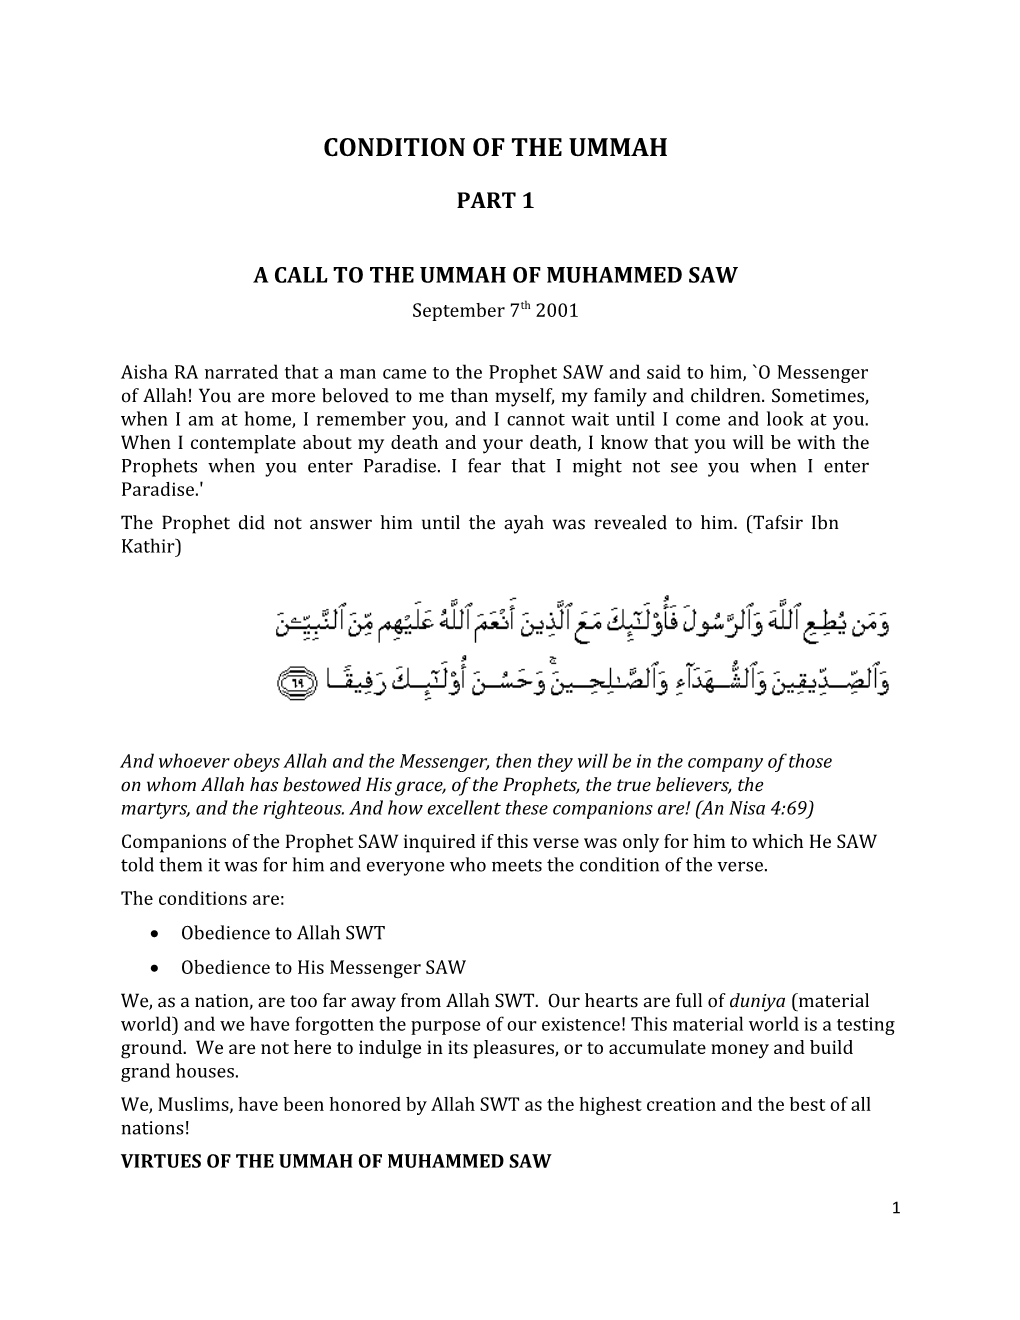 A Call to the Ummah of Muhammed Saw